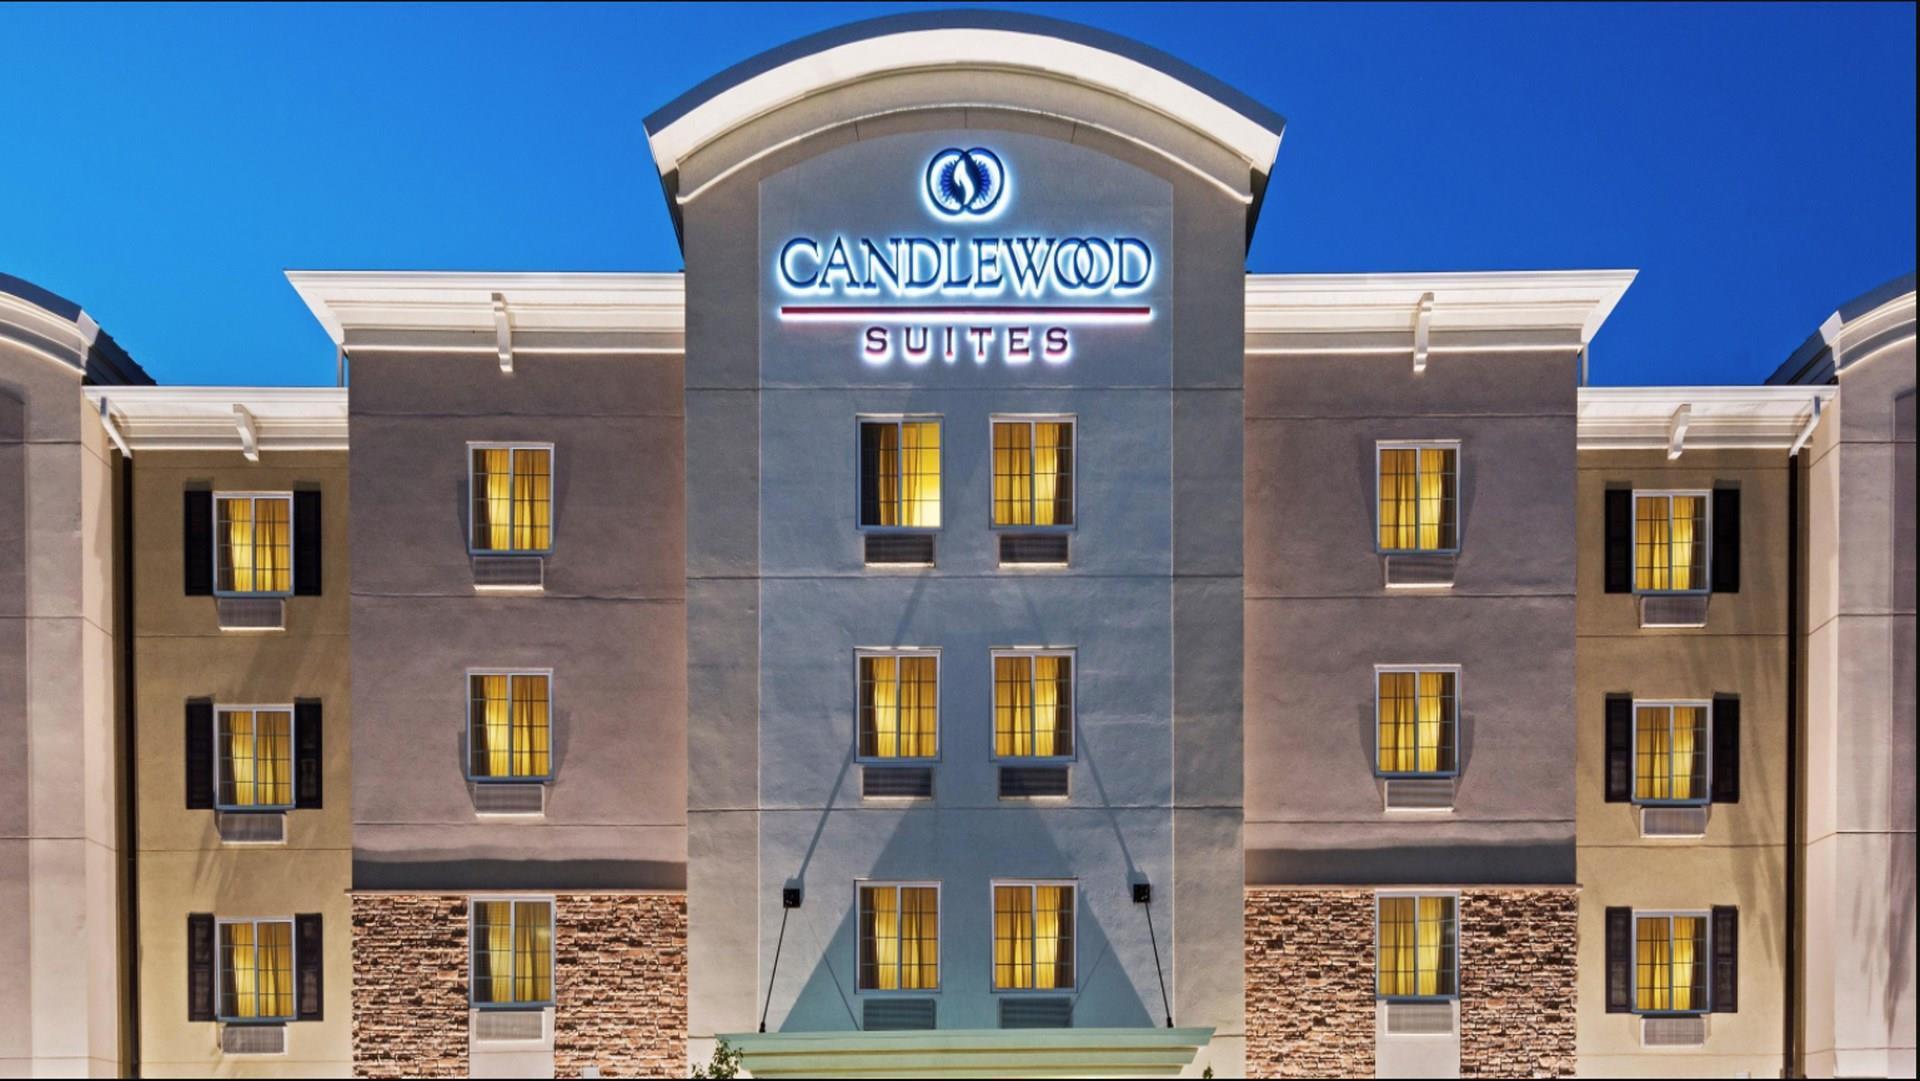 Candlewood Suites DTWN Medical Center in Rochester, MN